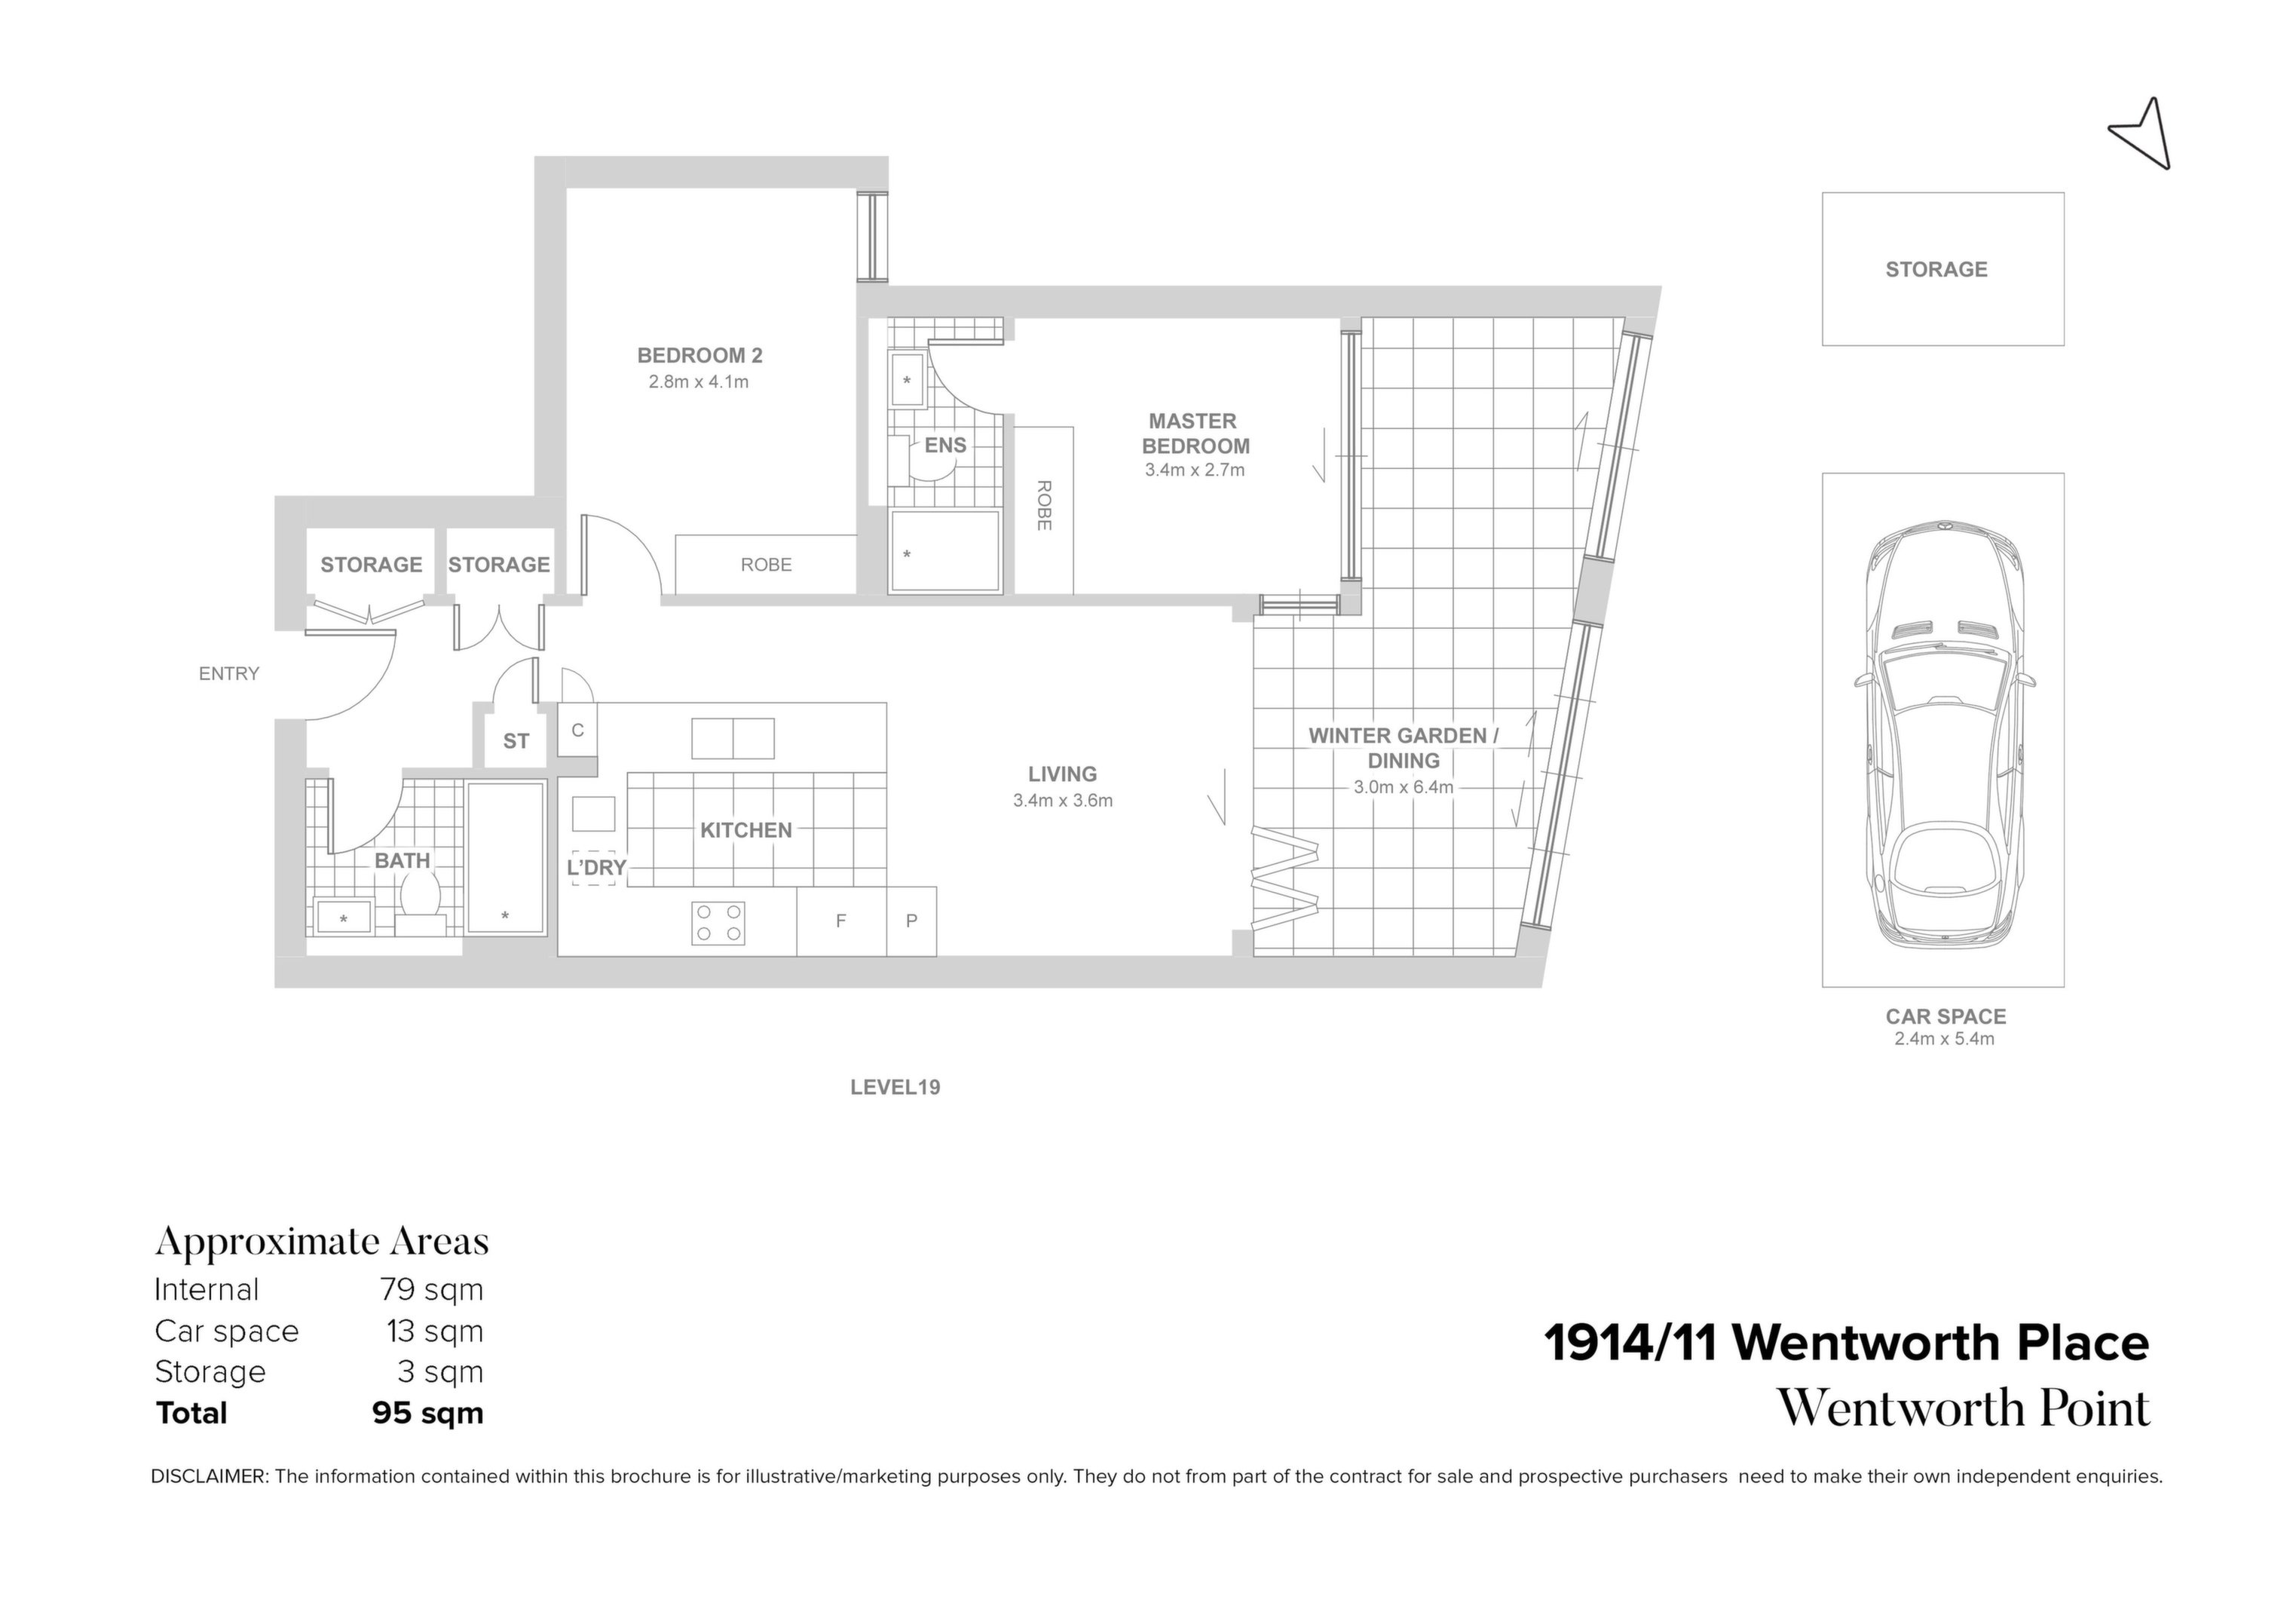 1914/11 Wentworth Place, Wentworth Point Sold by Chidiac Realty - floorplan